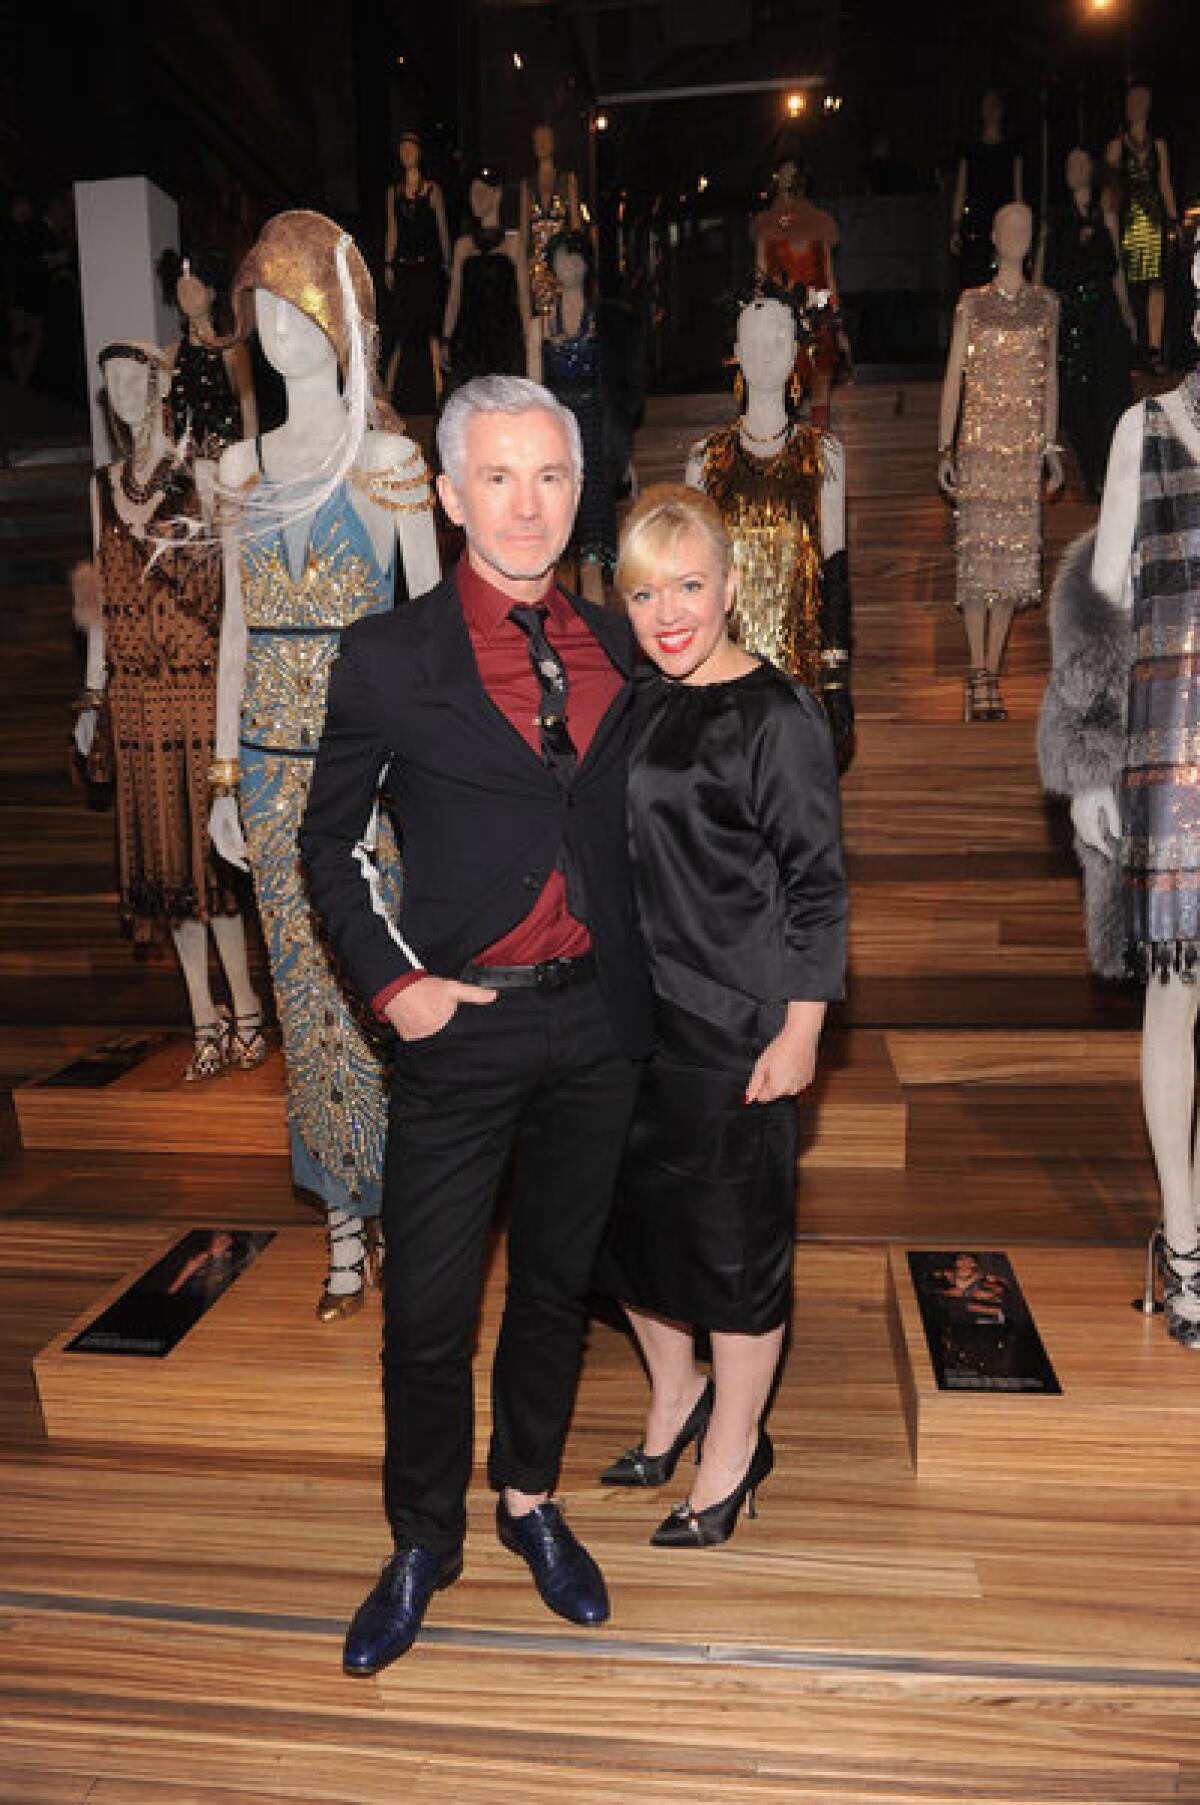 Baz Luhrmann, director/producer/co-writer of 'The Great Gatsby' and Catherine Martin, Academy Award-winning costume and production designer, at the "Gatsby" cocktail party and costume exhibit.